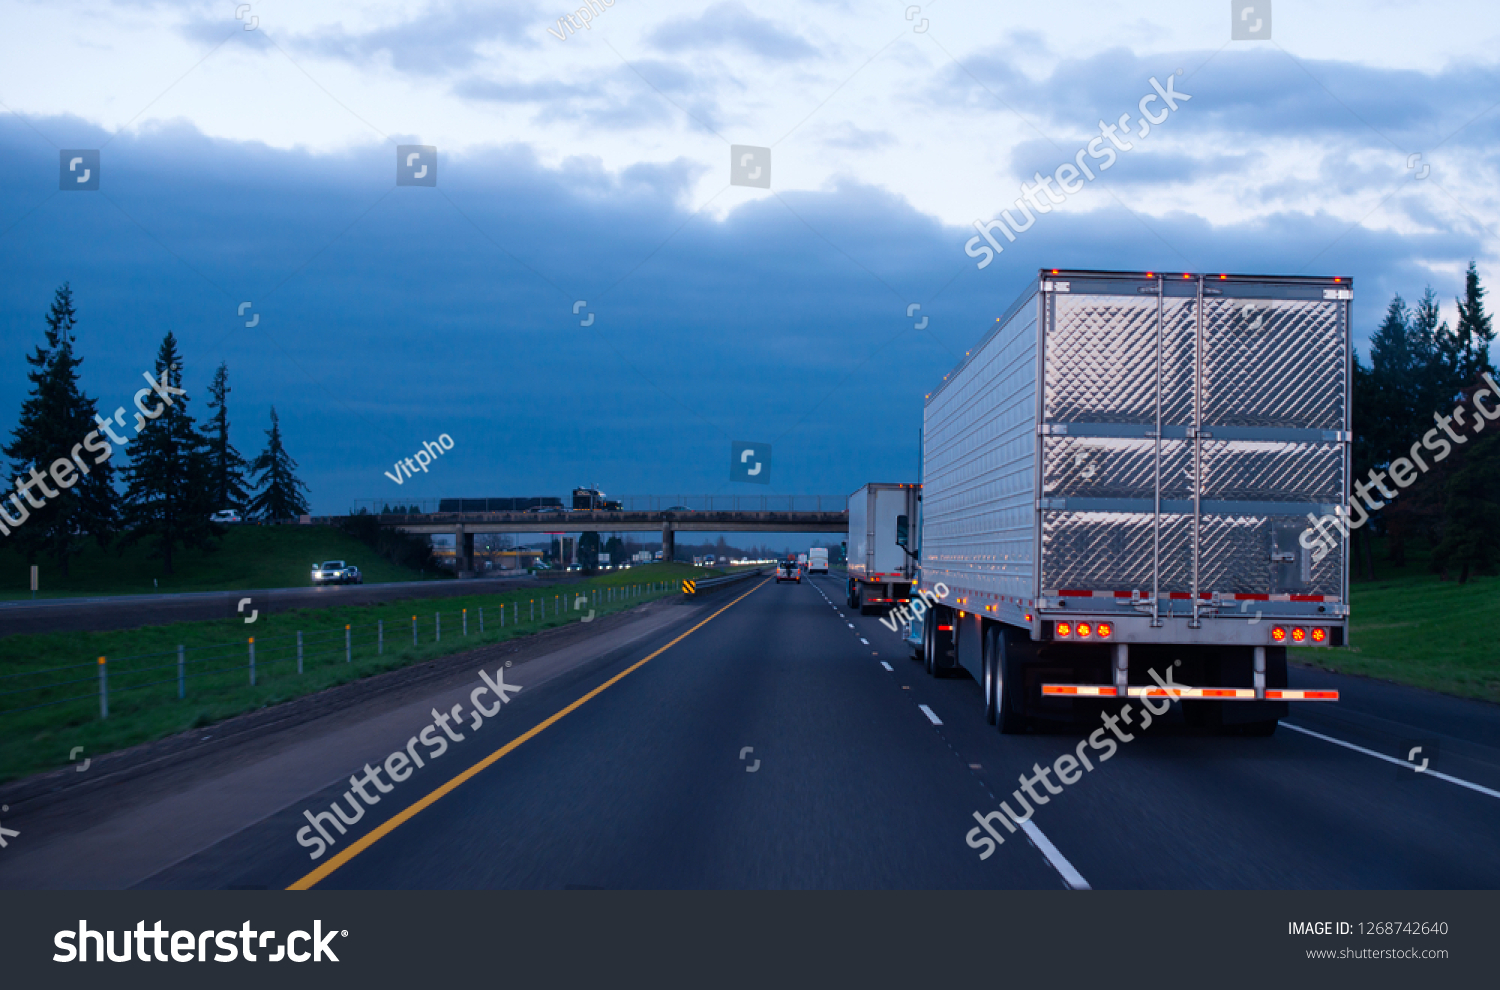 The convoy of semi trucks with reefer trailers on flat like an arrow evening road with lights on and reflection of light on a shiny trailer stainless steel doors. Trucks driving on a divided highway #1268742640